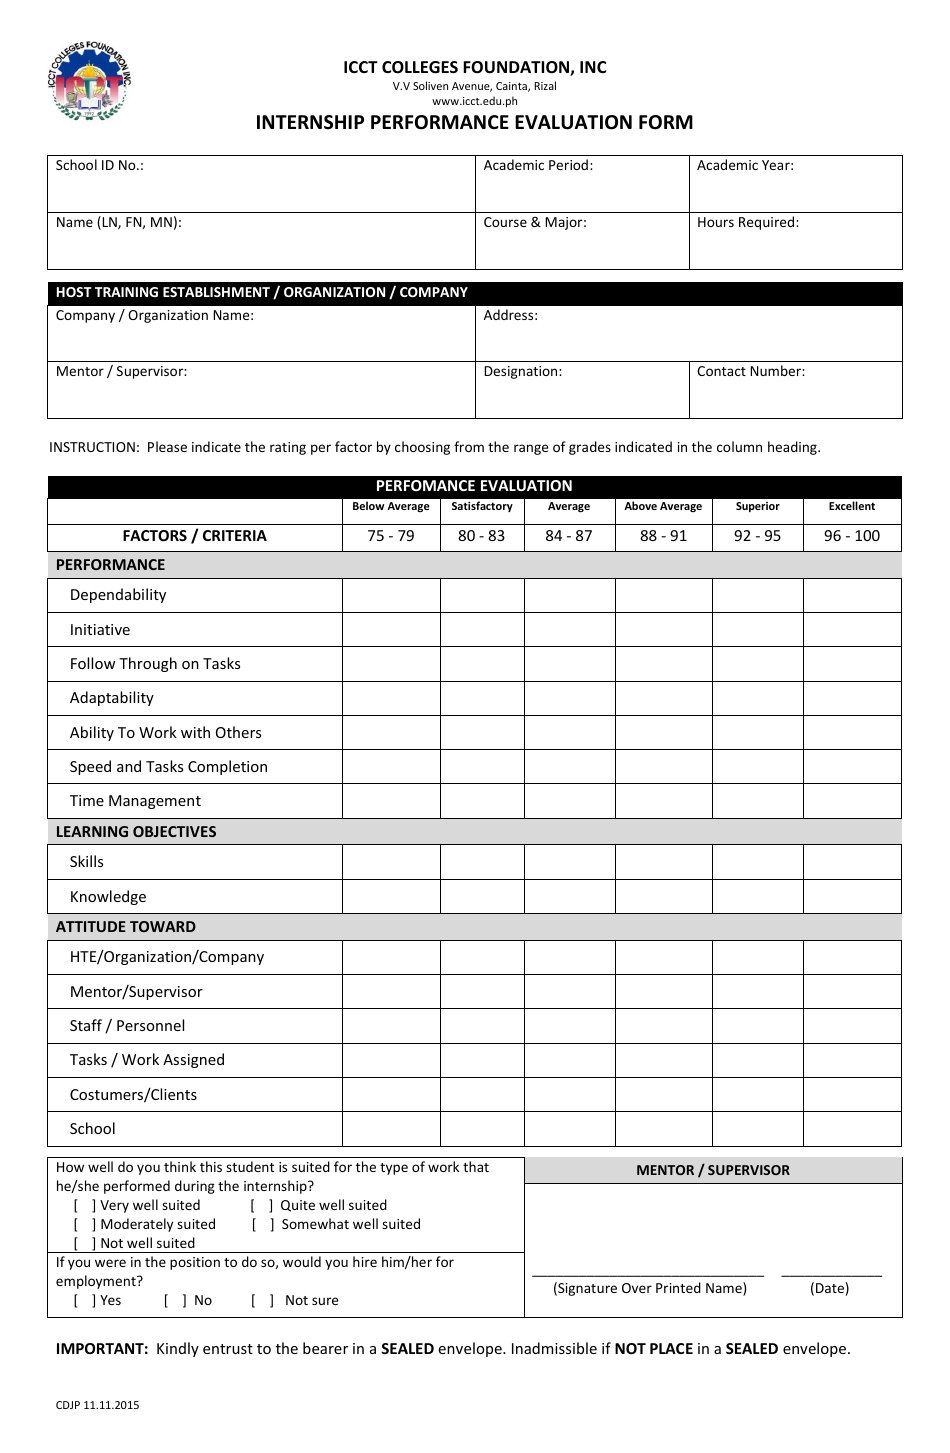 Internship Performance Evaluation Form - Icct Colleges Foundation - Rizal, Philippines, Page 1